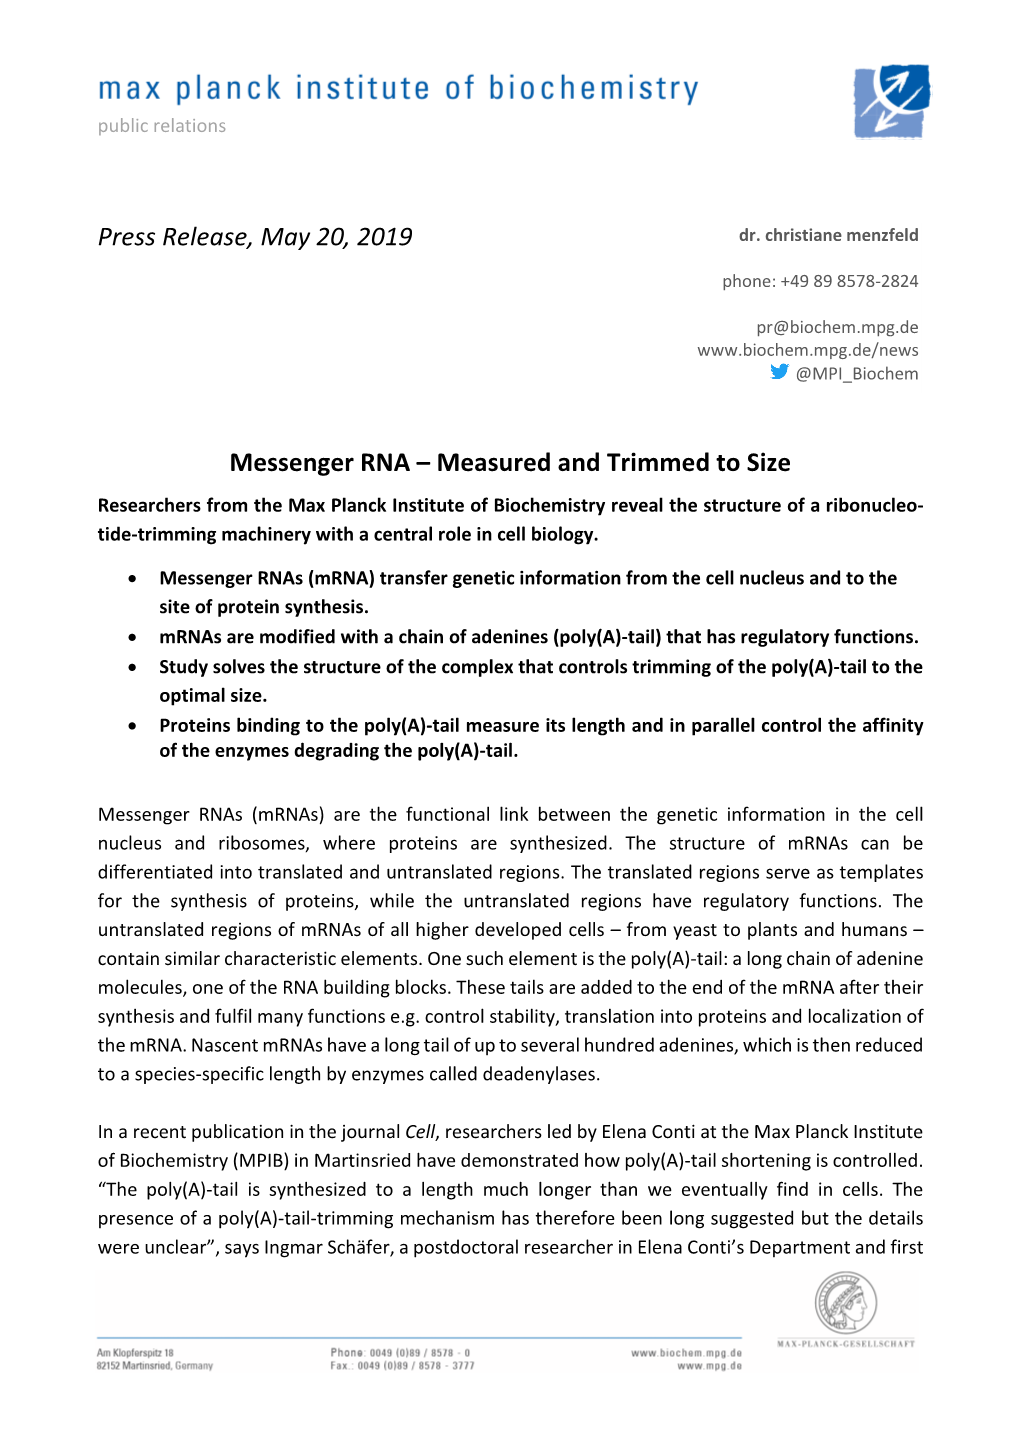 Press Release, May 20, 2019 Messenger RNA – Measured And